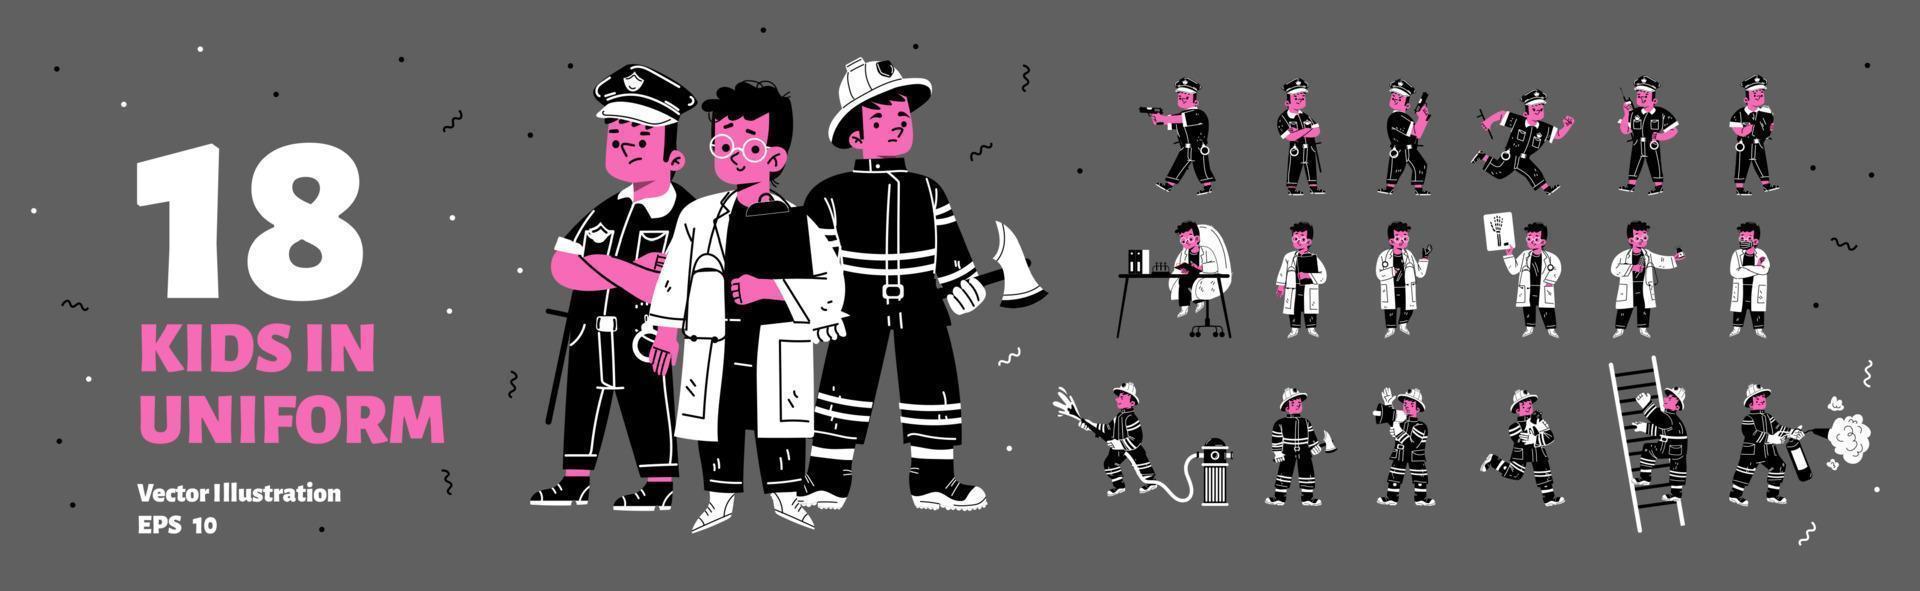 Kids in policeman, doctor and firefighter uniform vector